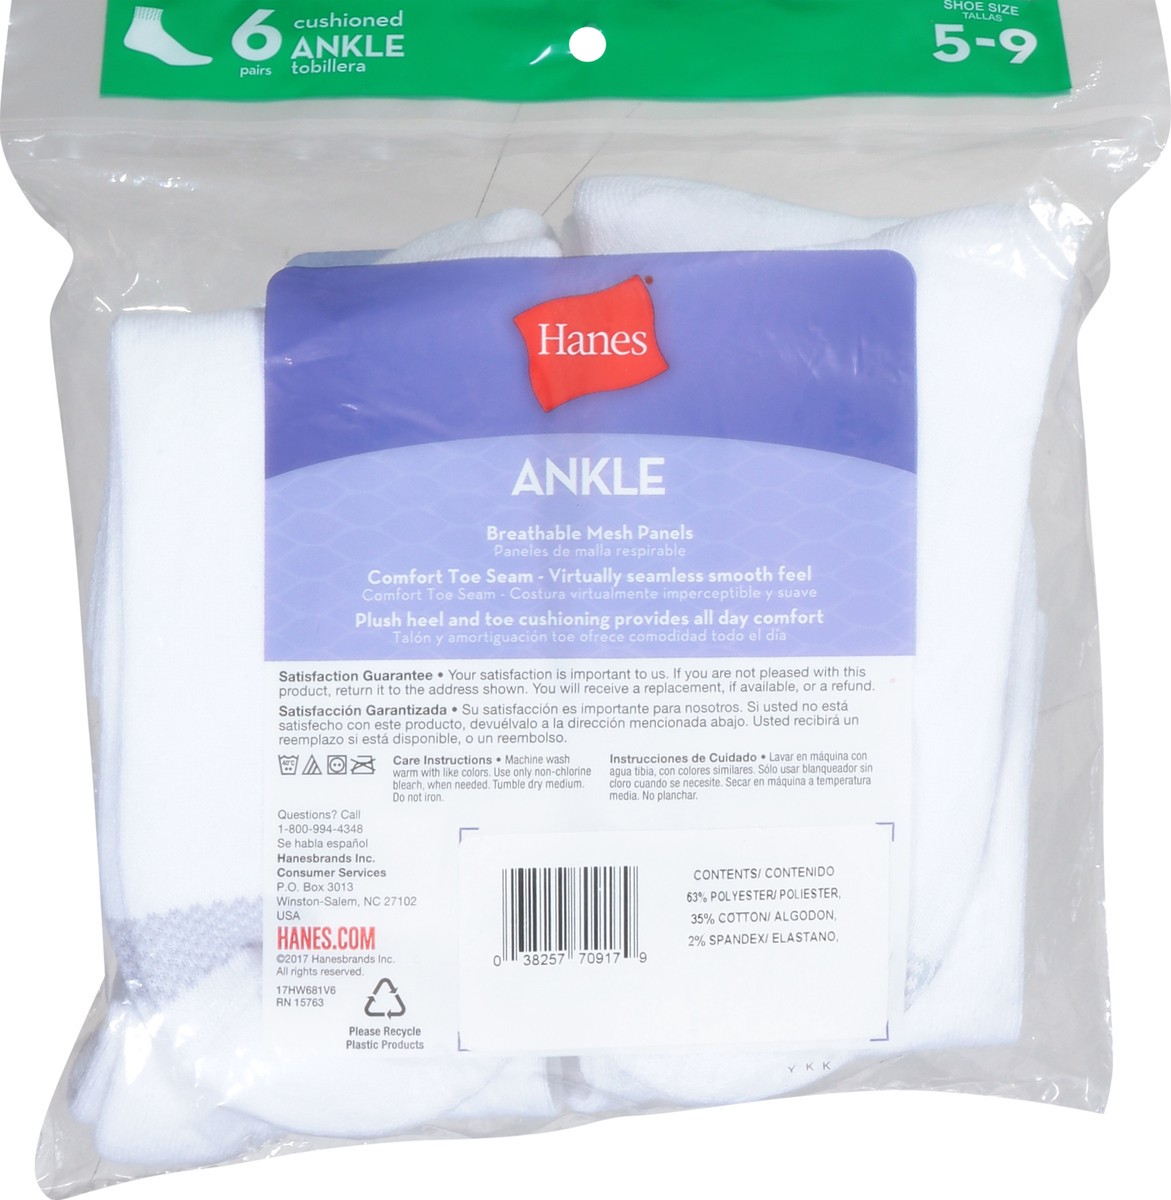 slide 5 of 9, Hanes Shoe Size 5-9 Cushioned Ankle Socks 6 Pairs, 1 ct